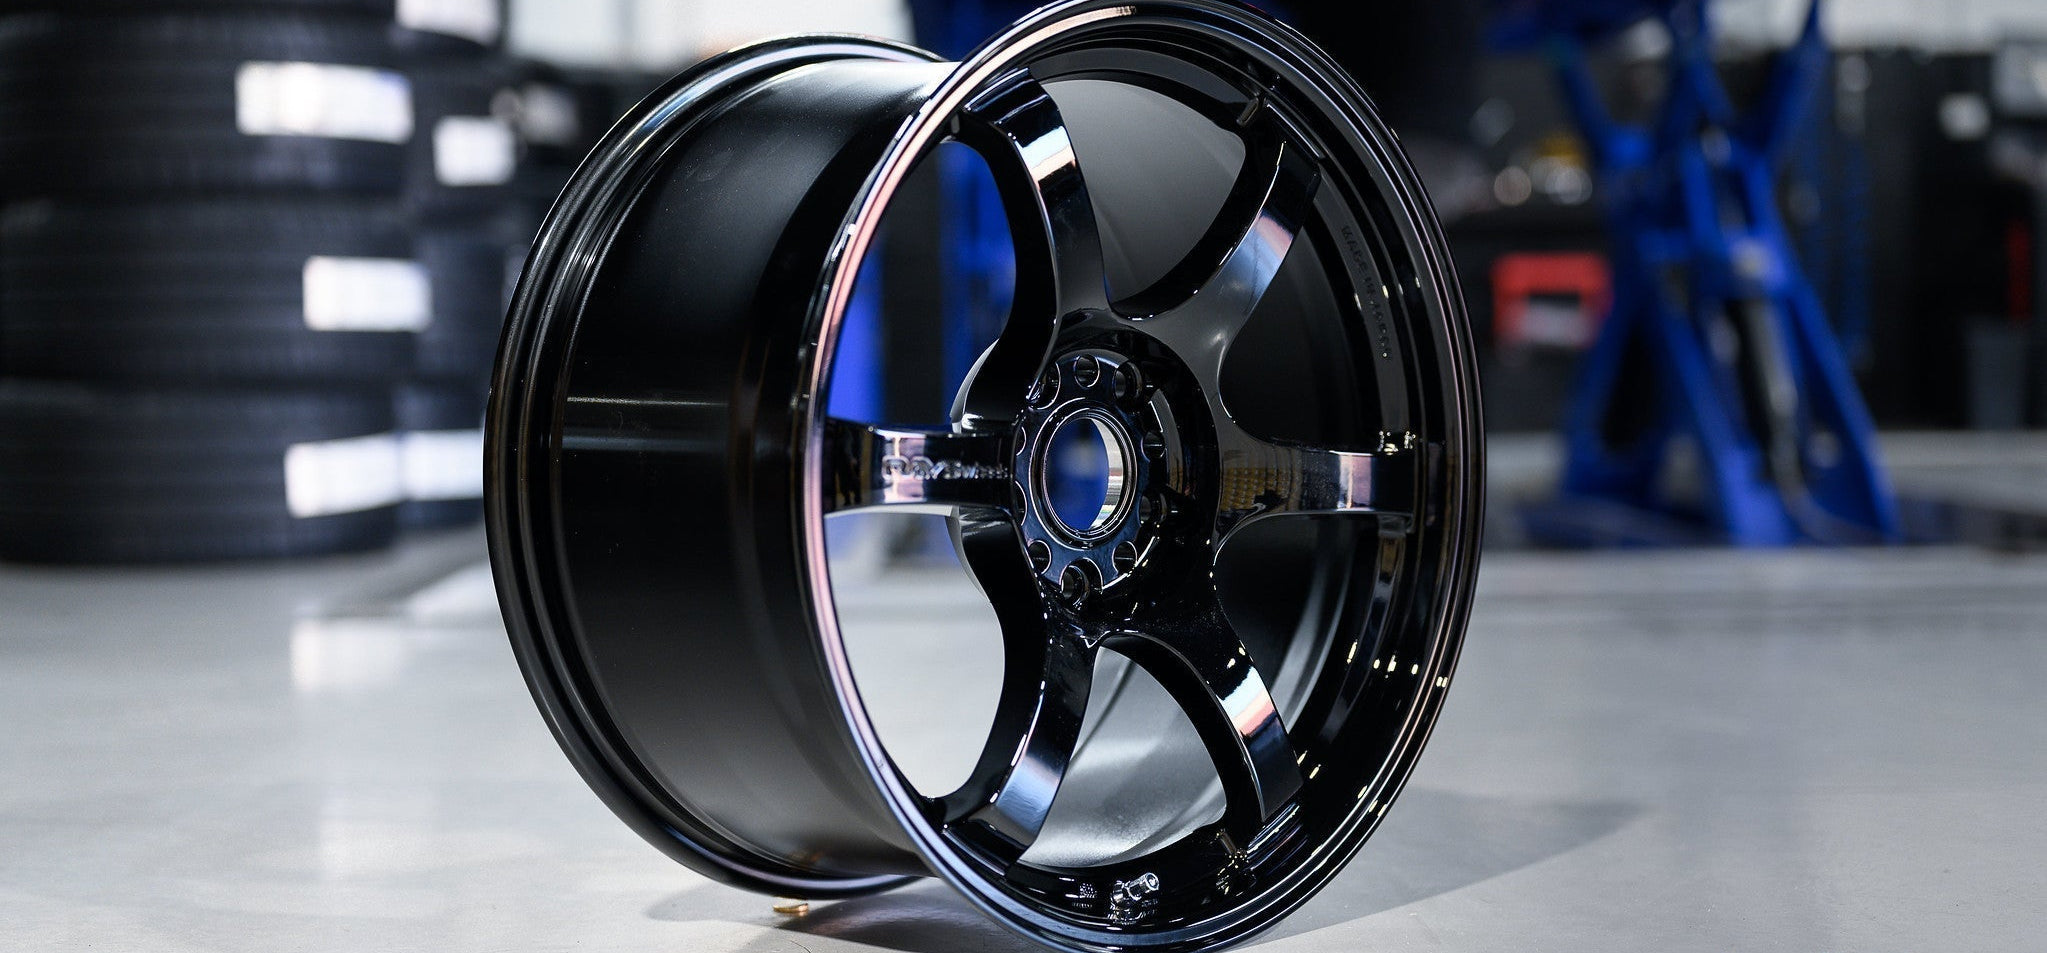 gramLIGHTS 57DR FK8/FL5 Type R - Premium Wheels from Gram Lights - From just $570.00! Shop now at MK MOTORSPORTS